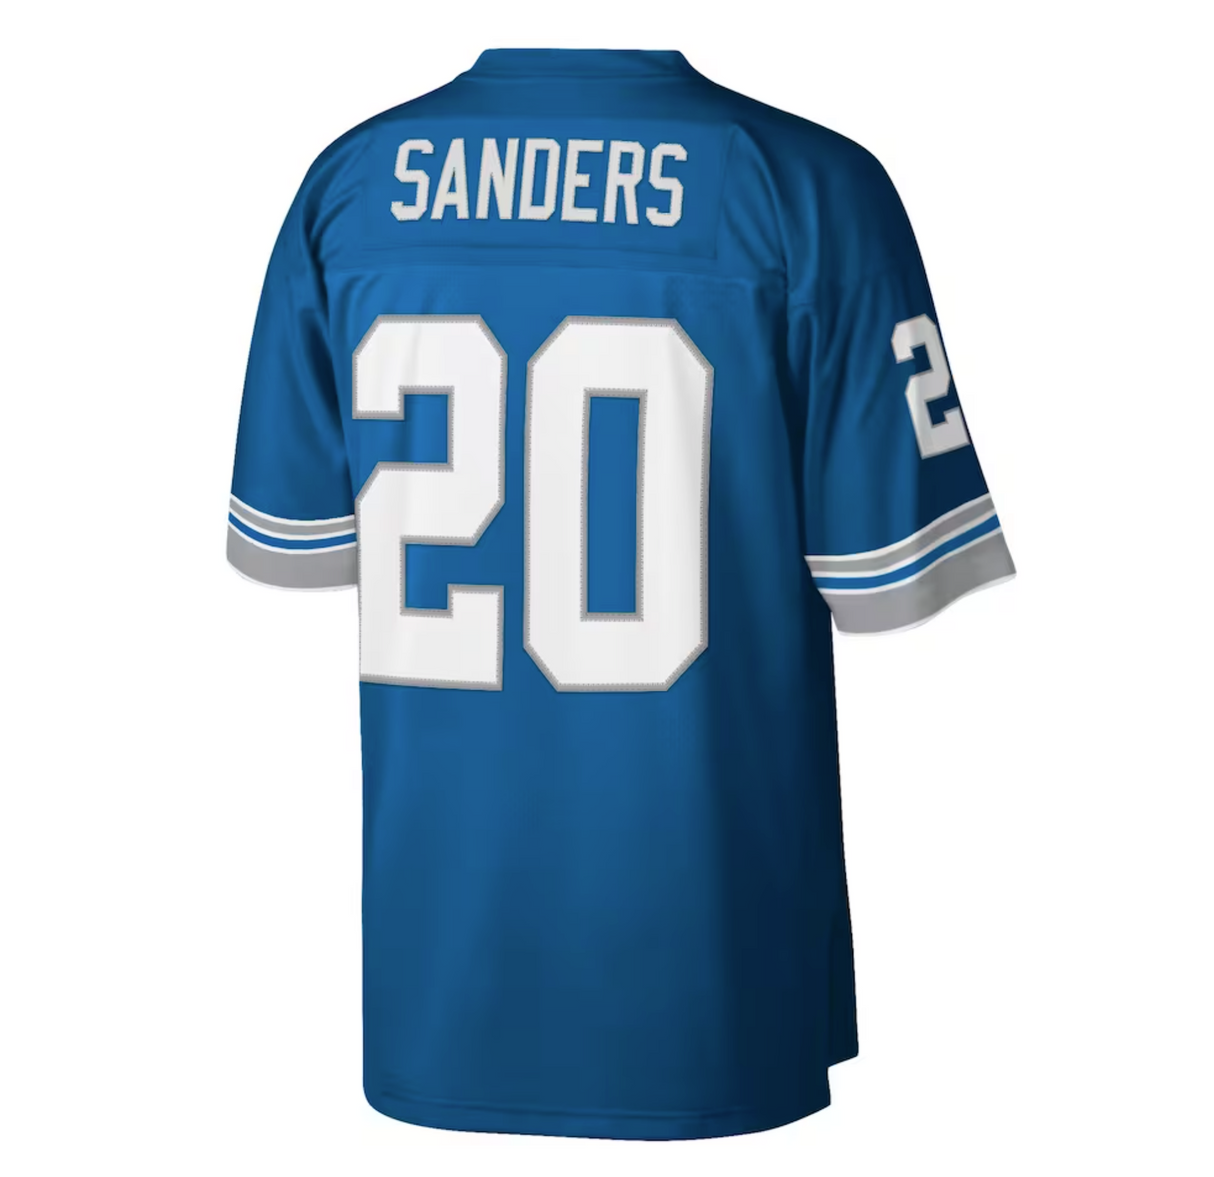 Lions Sanders Mitchell & Ness Adult Player Jersey